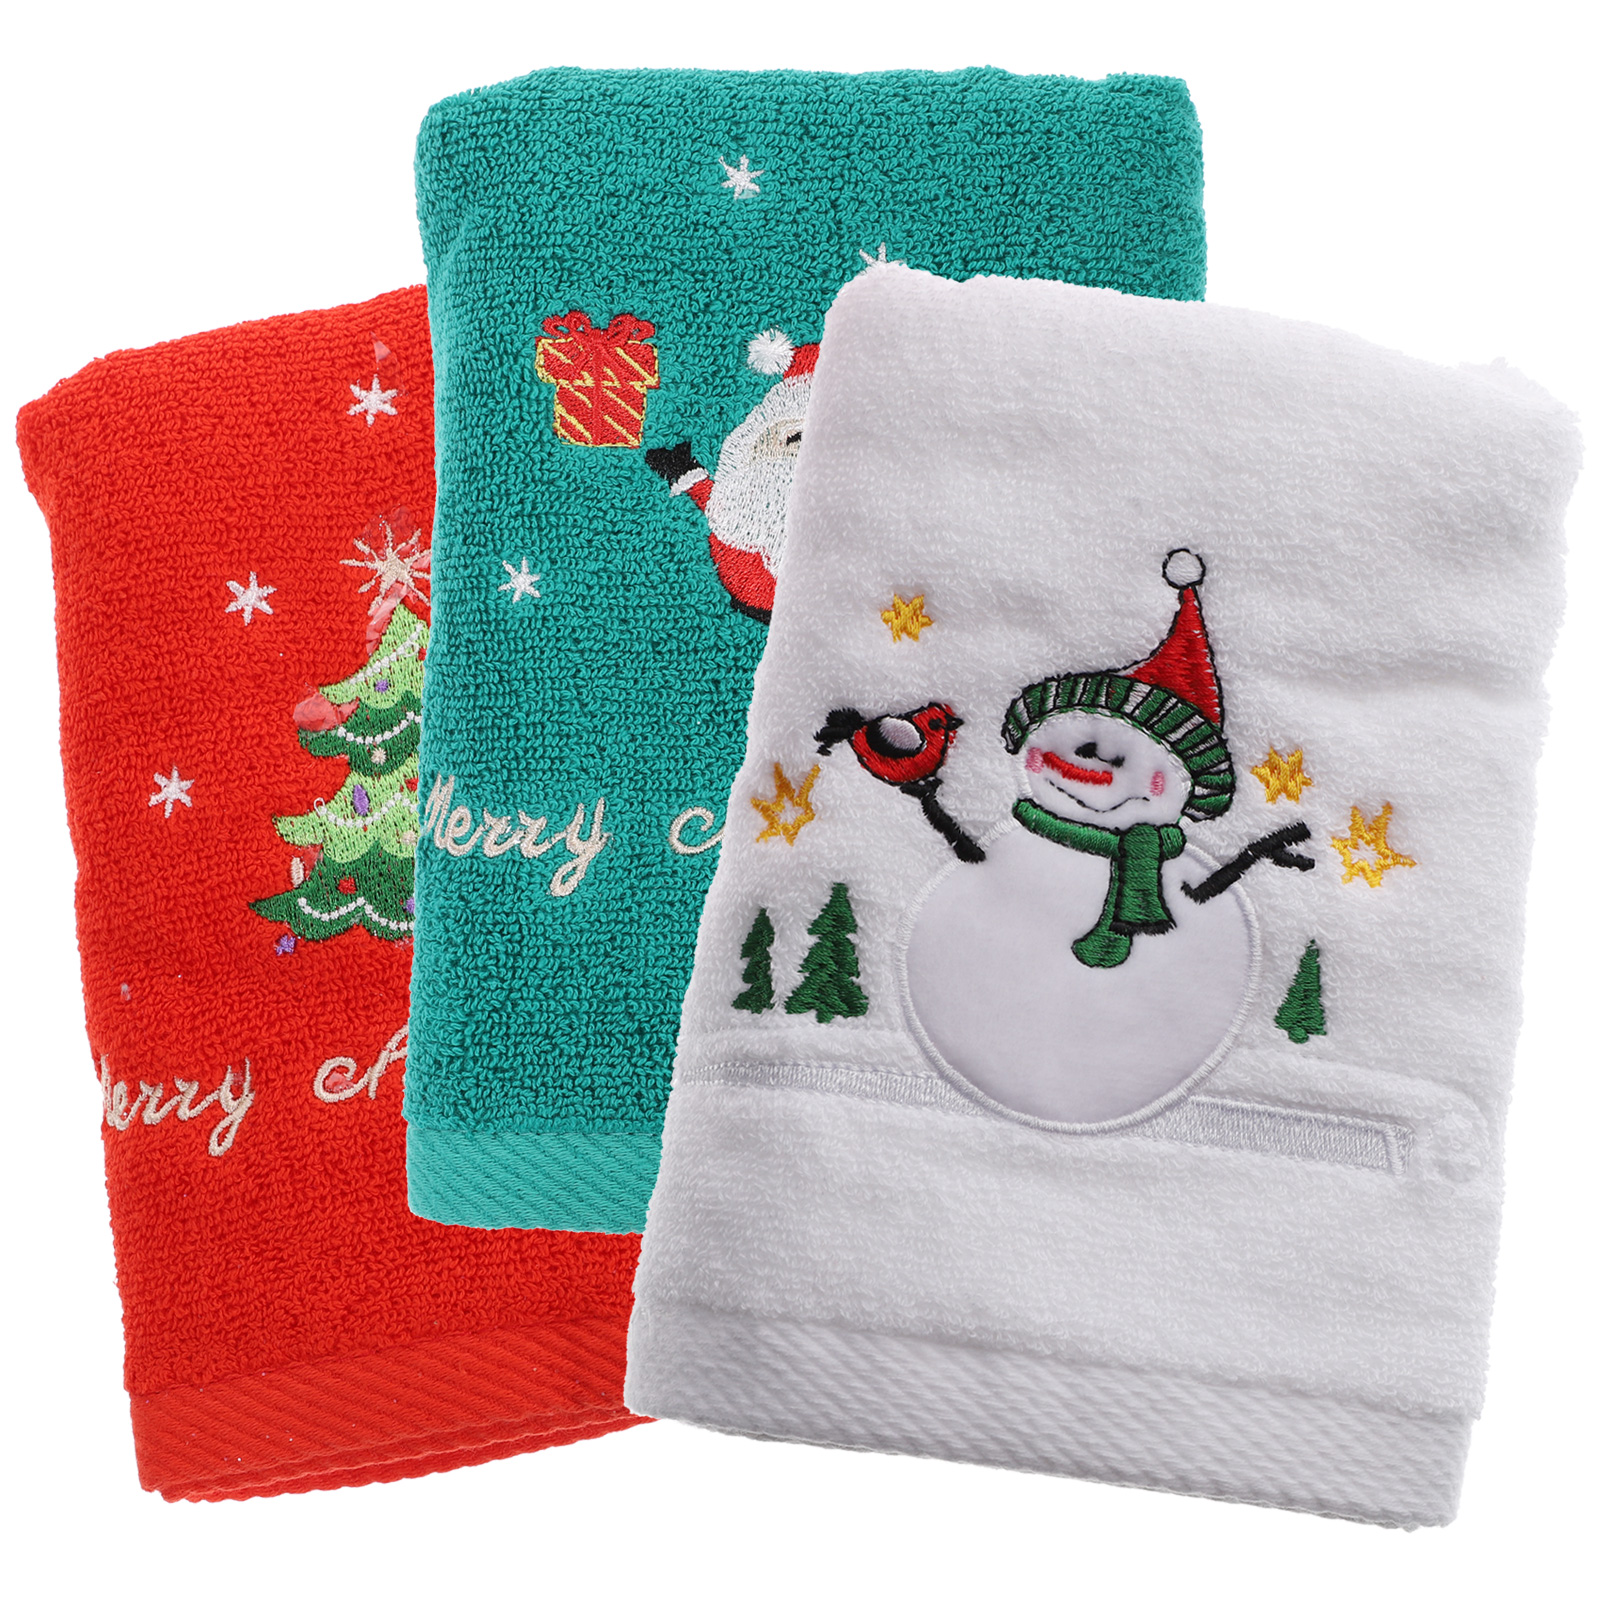 Christmas Savings! Shengxiny Christmas Gift Towel Clearance Hand Wash Washing Soft Water Holidy Embroidered Gift Towels Washcloth Absorption